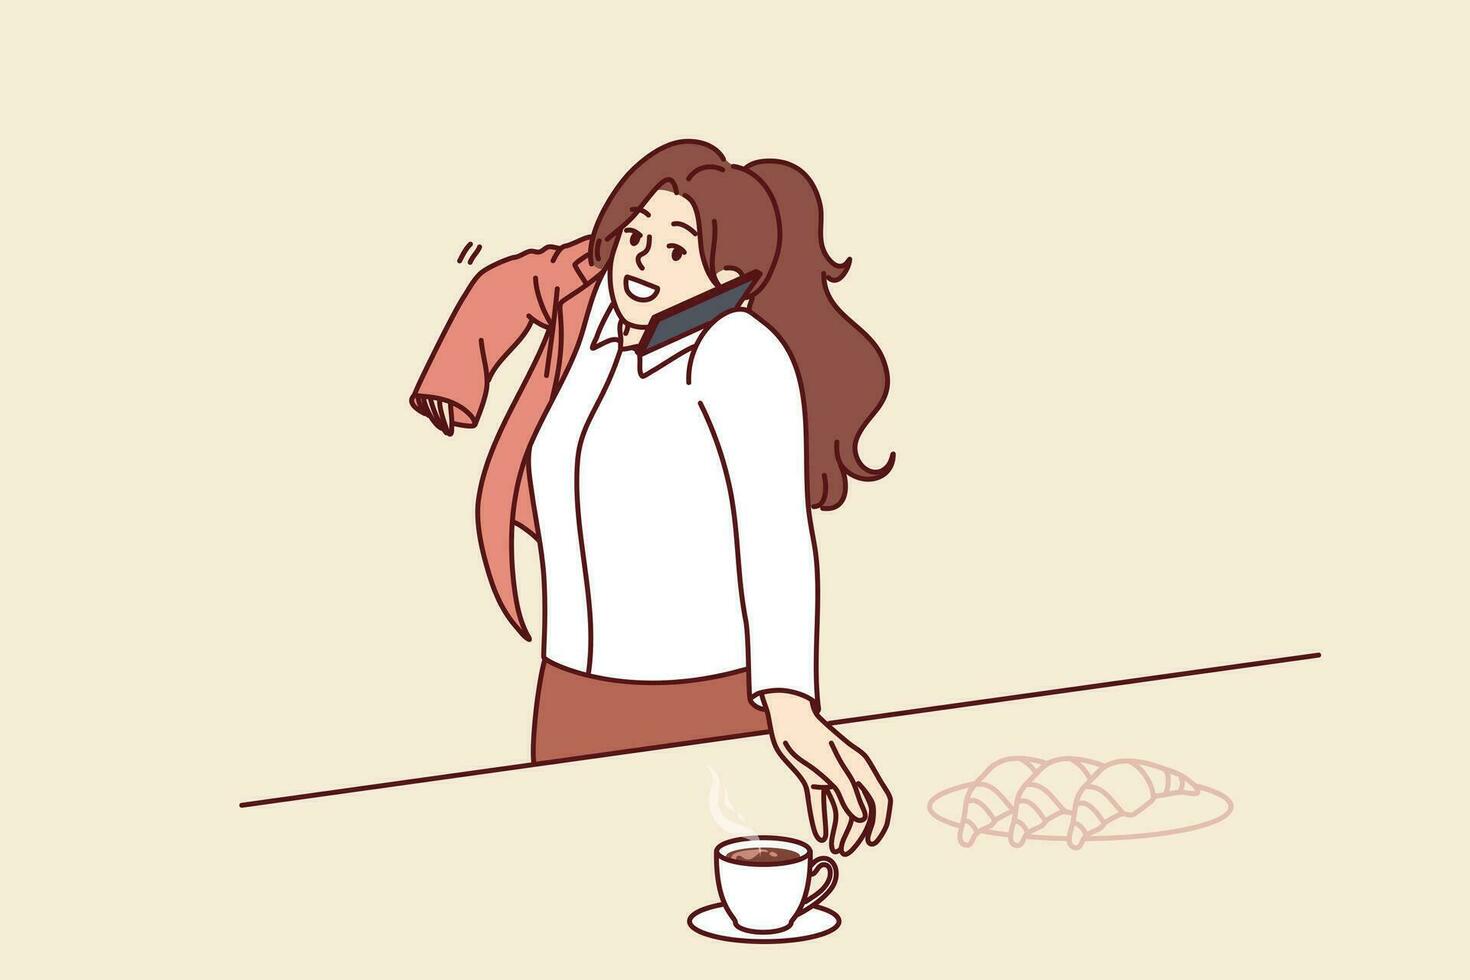 Busy woman makes business phone call having breakfast and puts on jacket hurrying to work. Busy businesswoman in hurry talking on phone and drinking coffee to get job done without breaking deadlines vector